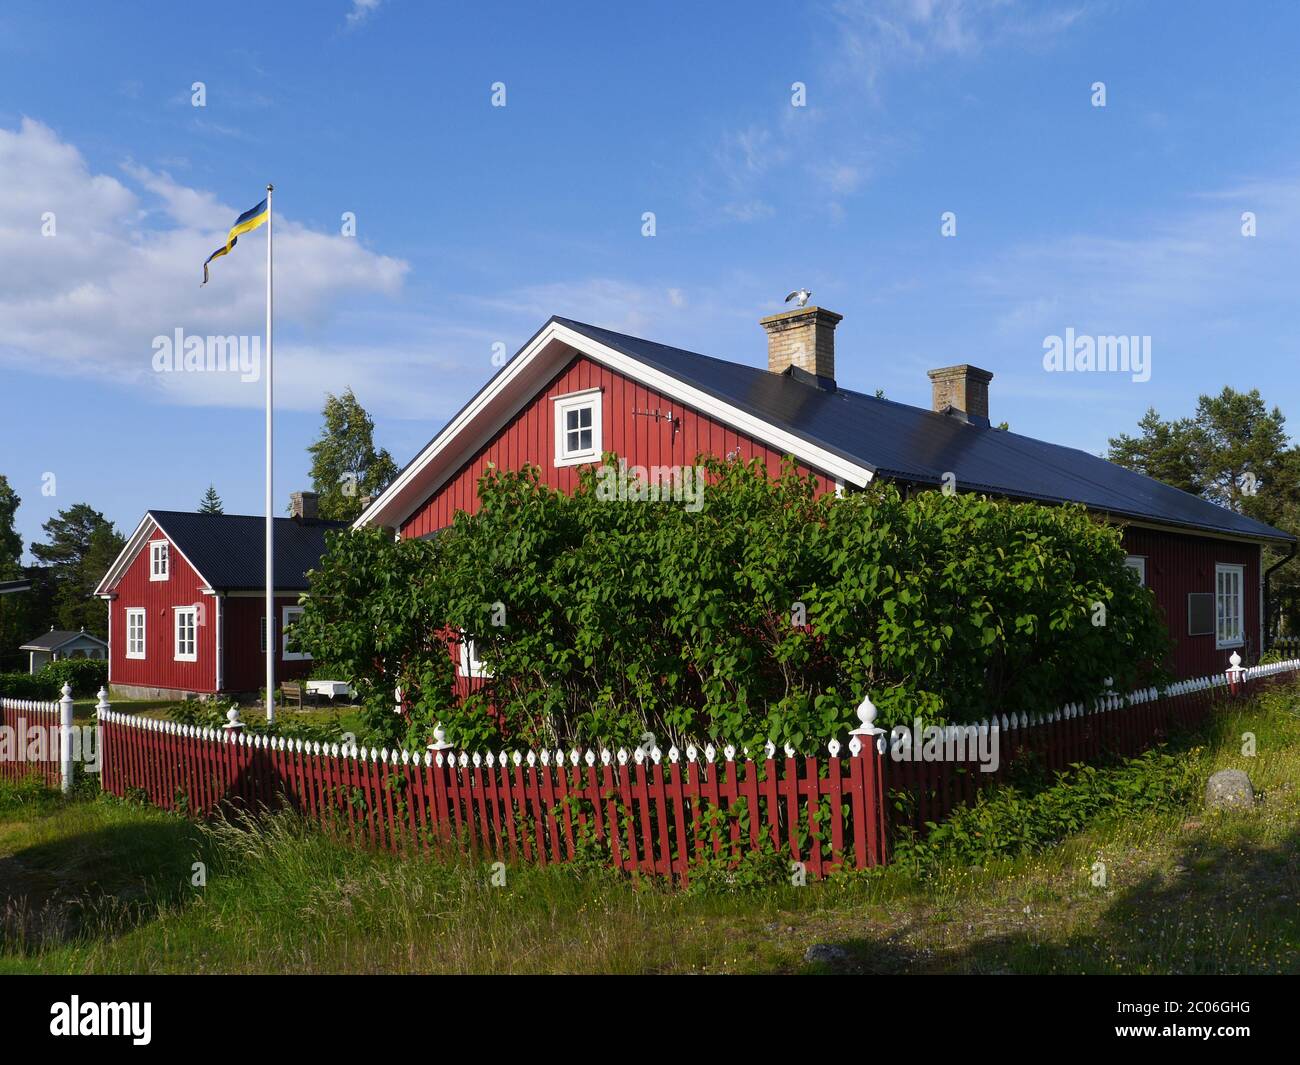 holiday homes in sweden Stock Photo